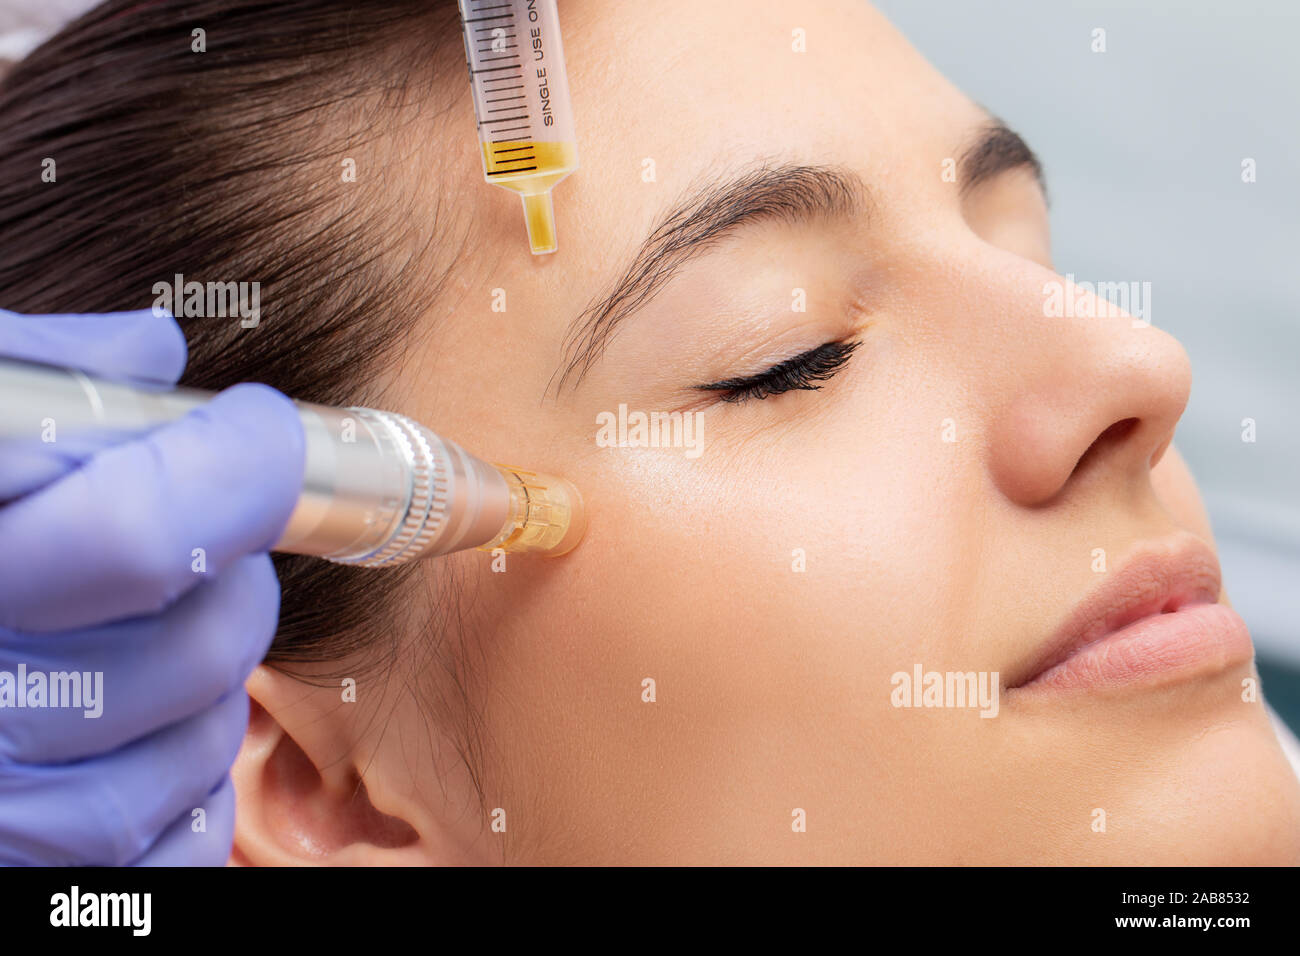 Macro close up of therapist injecting enzymes and with derma pen around woman's eyes. Stock Photo